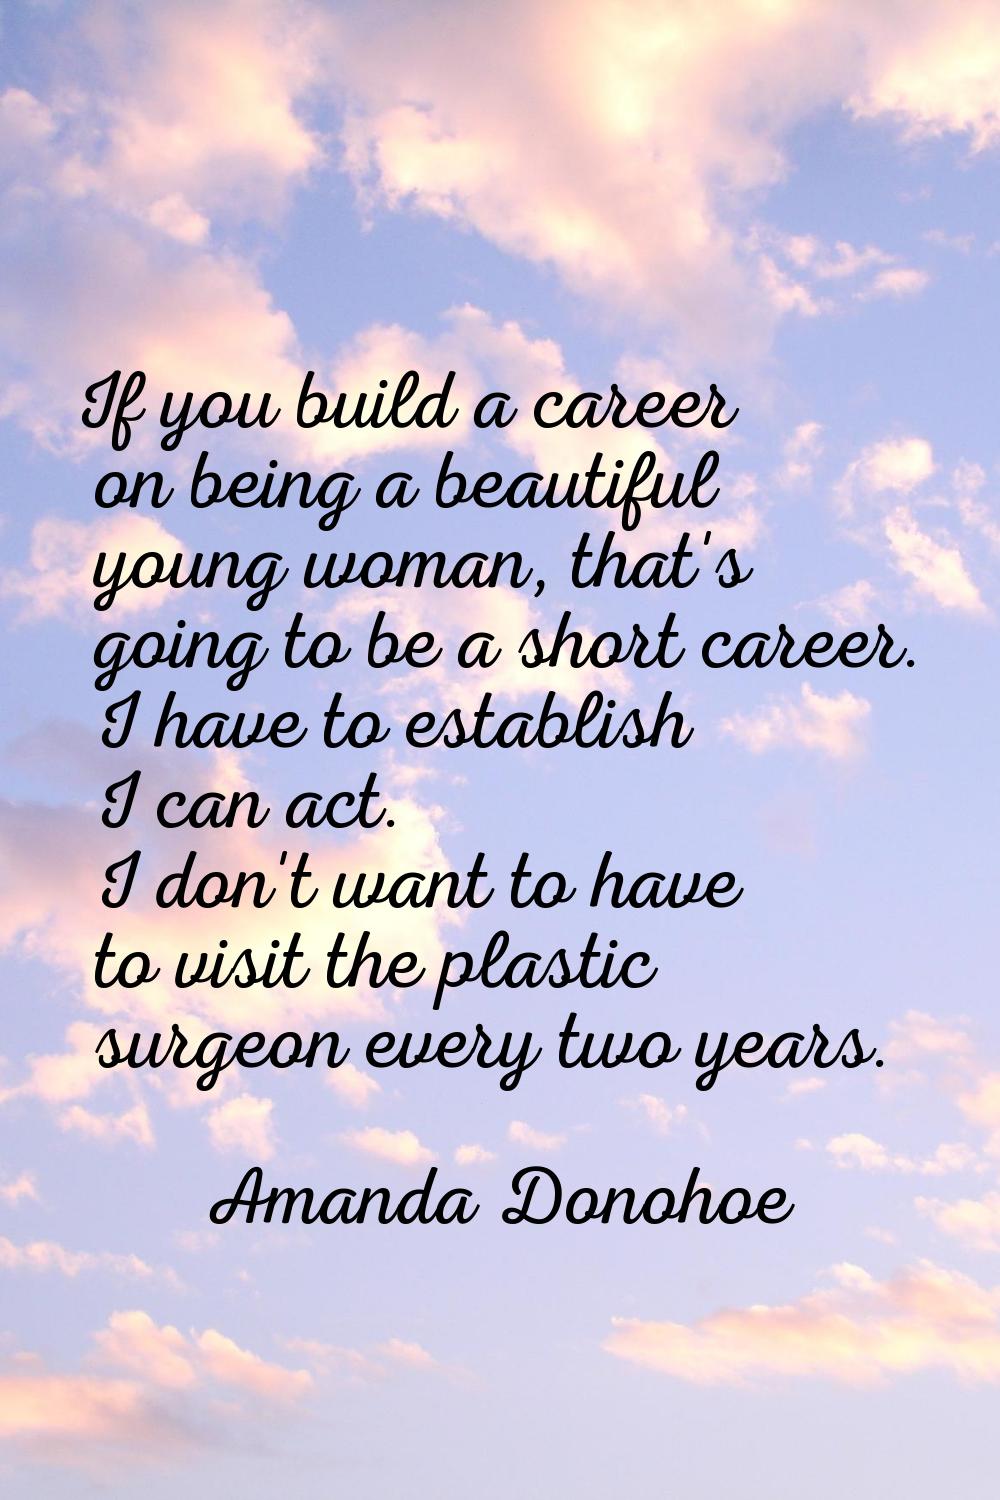 If you build a career on being a beautiful young woman, that's going to be a short career. I have t